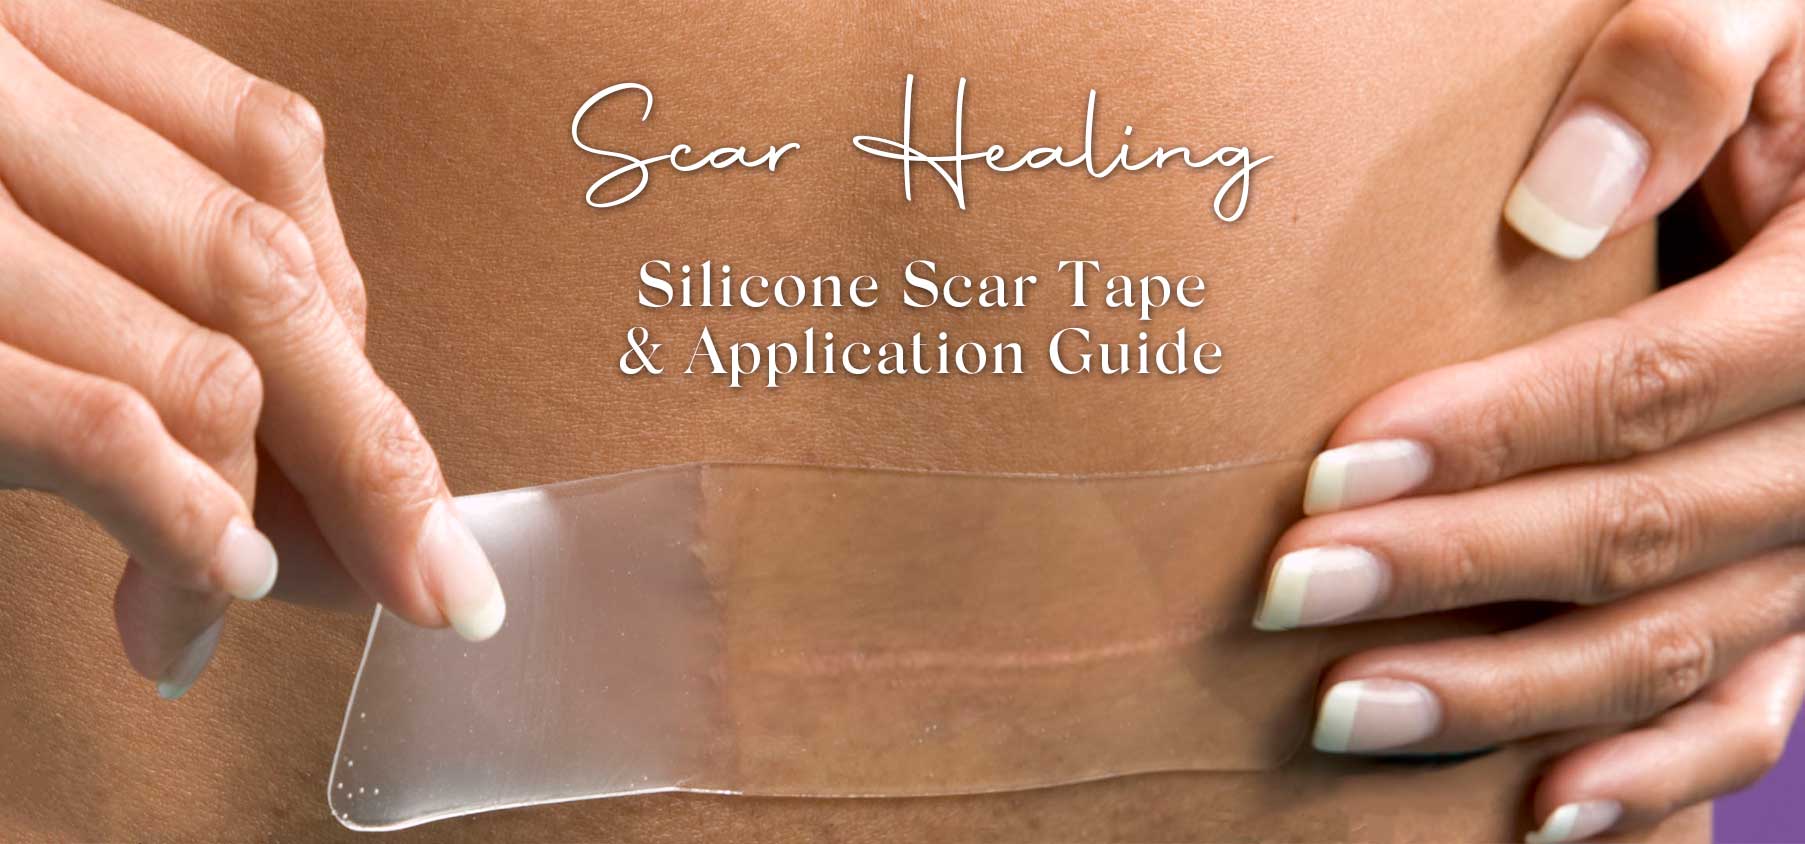 Woman applying silicone scar tape